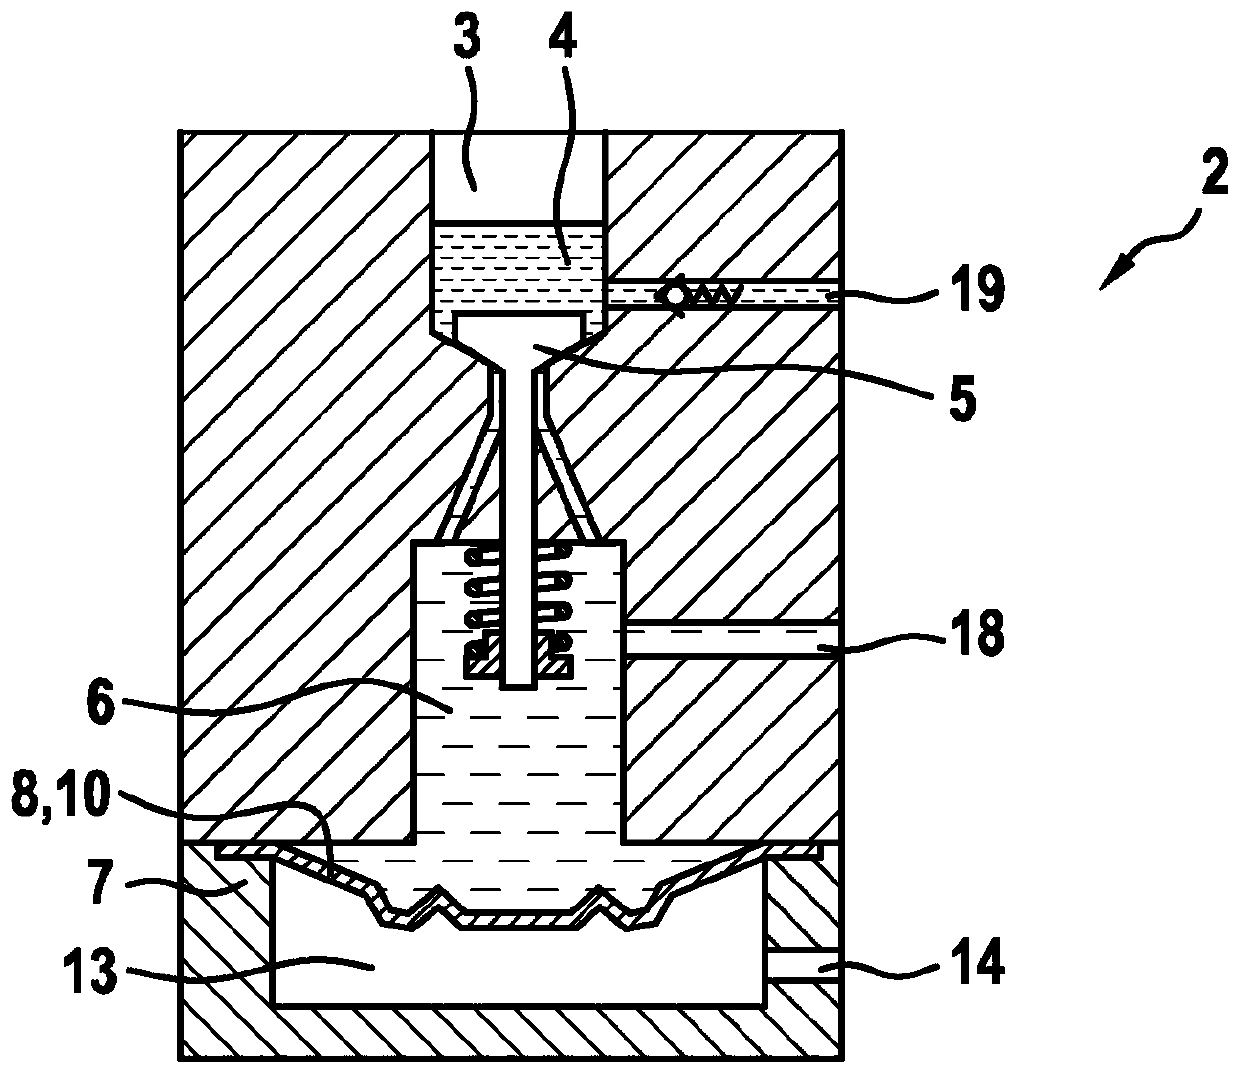 Fuel supply device for cryogenic fuels, and method for operating a fuel supply device for cryogenic fuels